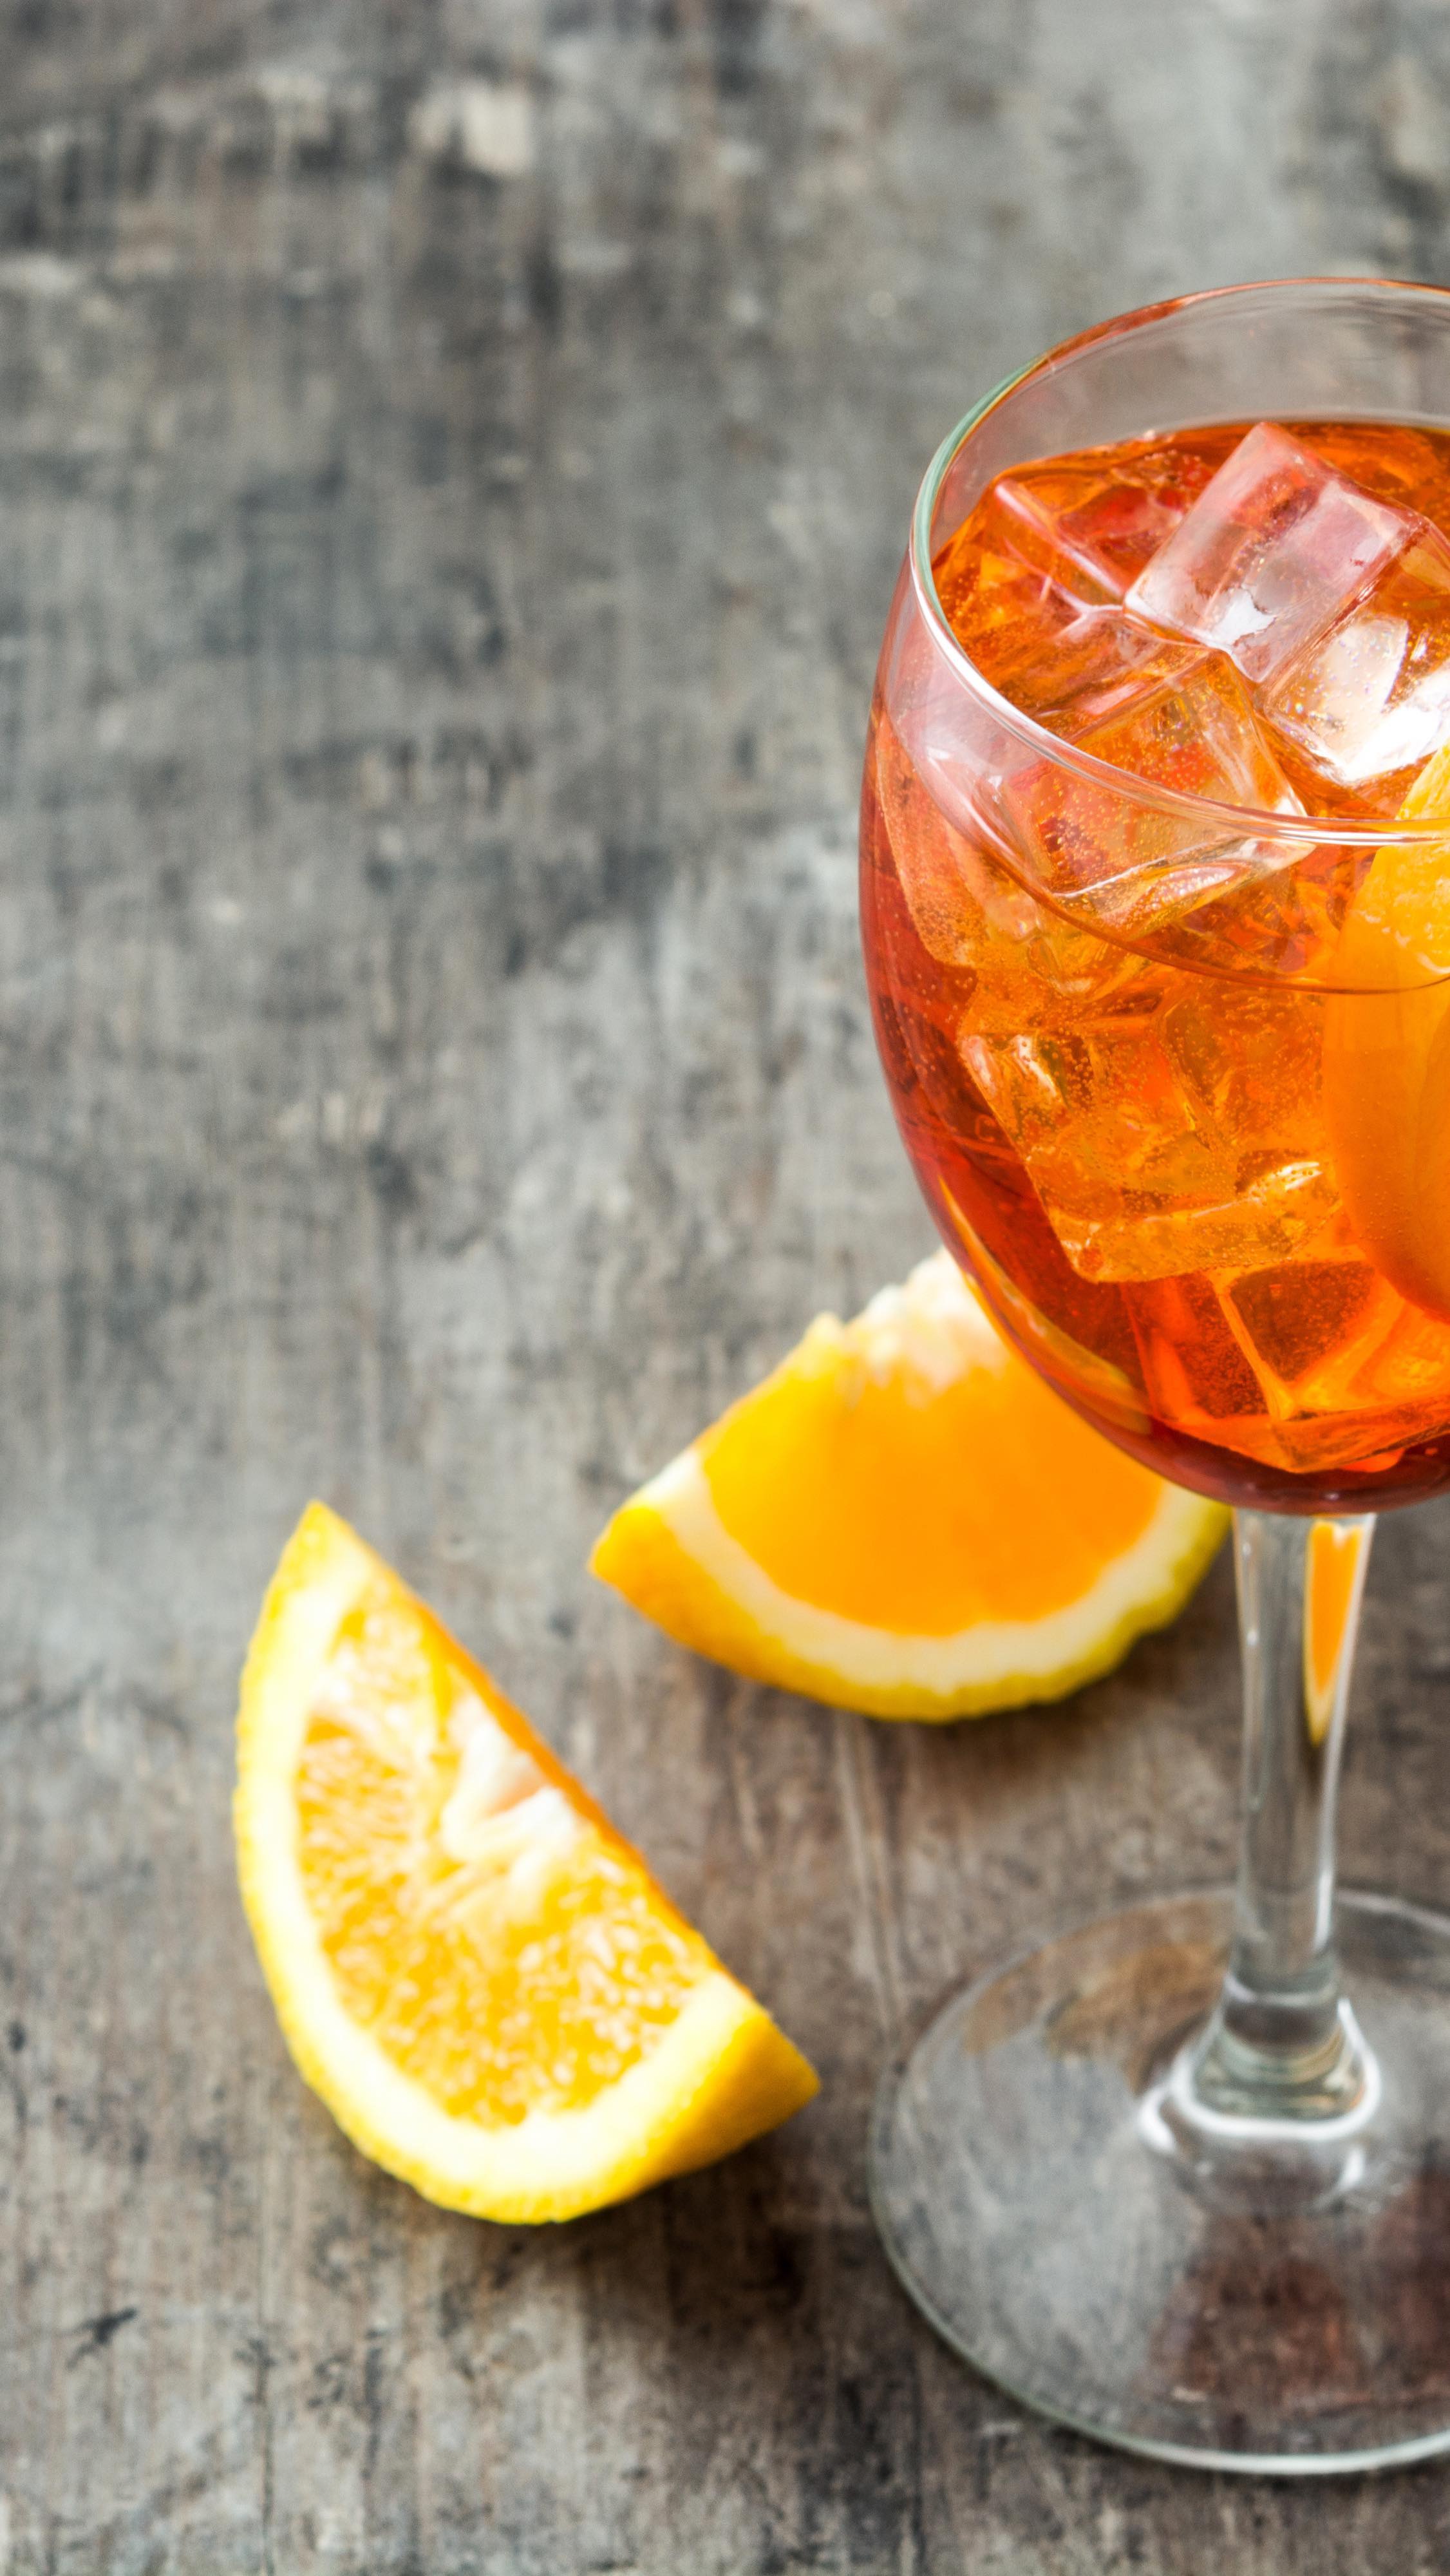 The popularity of Italy’s #1 cocktail has spread around the globe and is now a staple on most NYC bar menus. Light, refreshing, and slightly bittersweet, the Aperol Spritz is the perfect drink to kick-off your evening festivities.

Build cocktail in a wine glass
1.5 oz Aperol Liqueur
Add ice
1.5 oz Prosecco
1.5 oz Club Soda
Mix with a Bar Spoon
Top with more ice if necessary
Garnish with an orange slice

#eliteamenity#cocktail#aperol#aperolspritz#liquor#wine#champagne#mixology#mixologist#luxurylifestyle